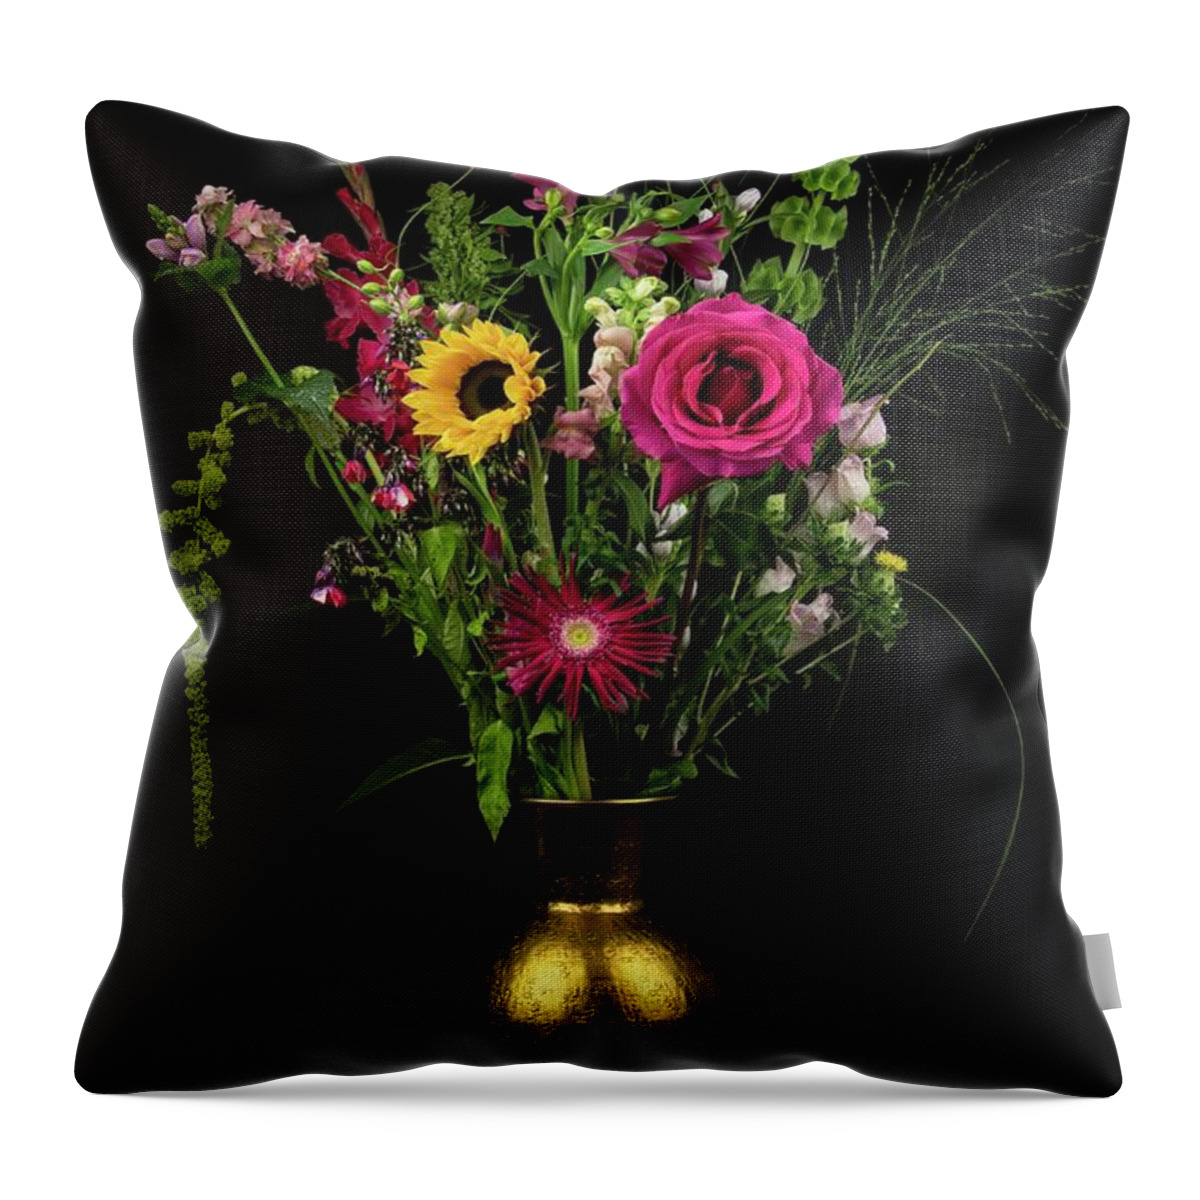 Still Life Throw Pillow featuring the photograph Still Life Colorful Bouquet by Marjolein Van Middelkoop